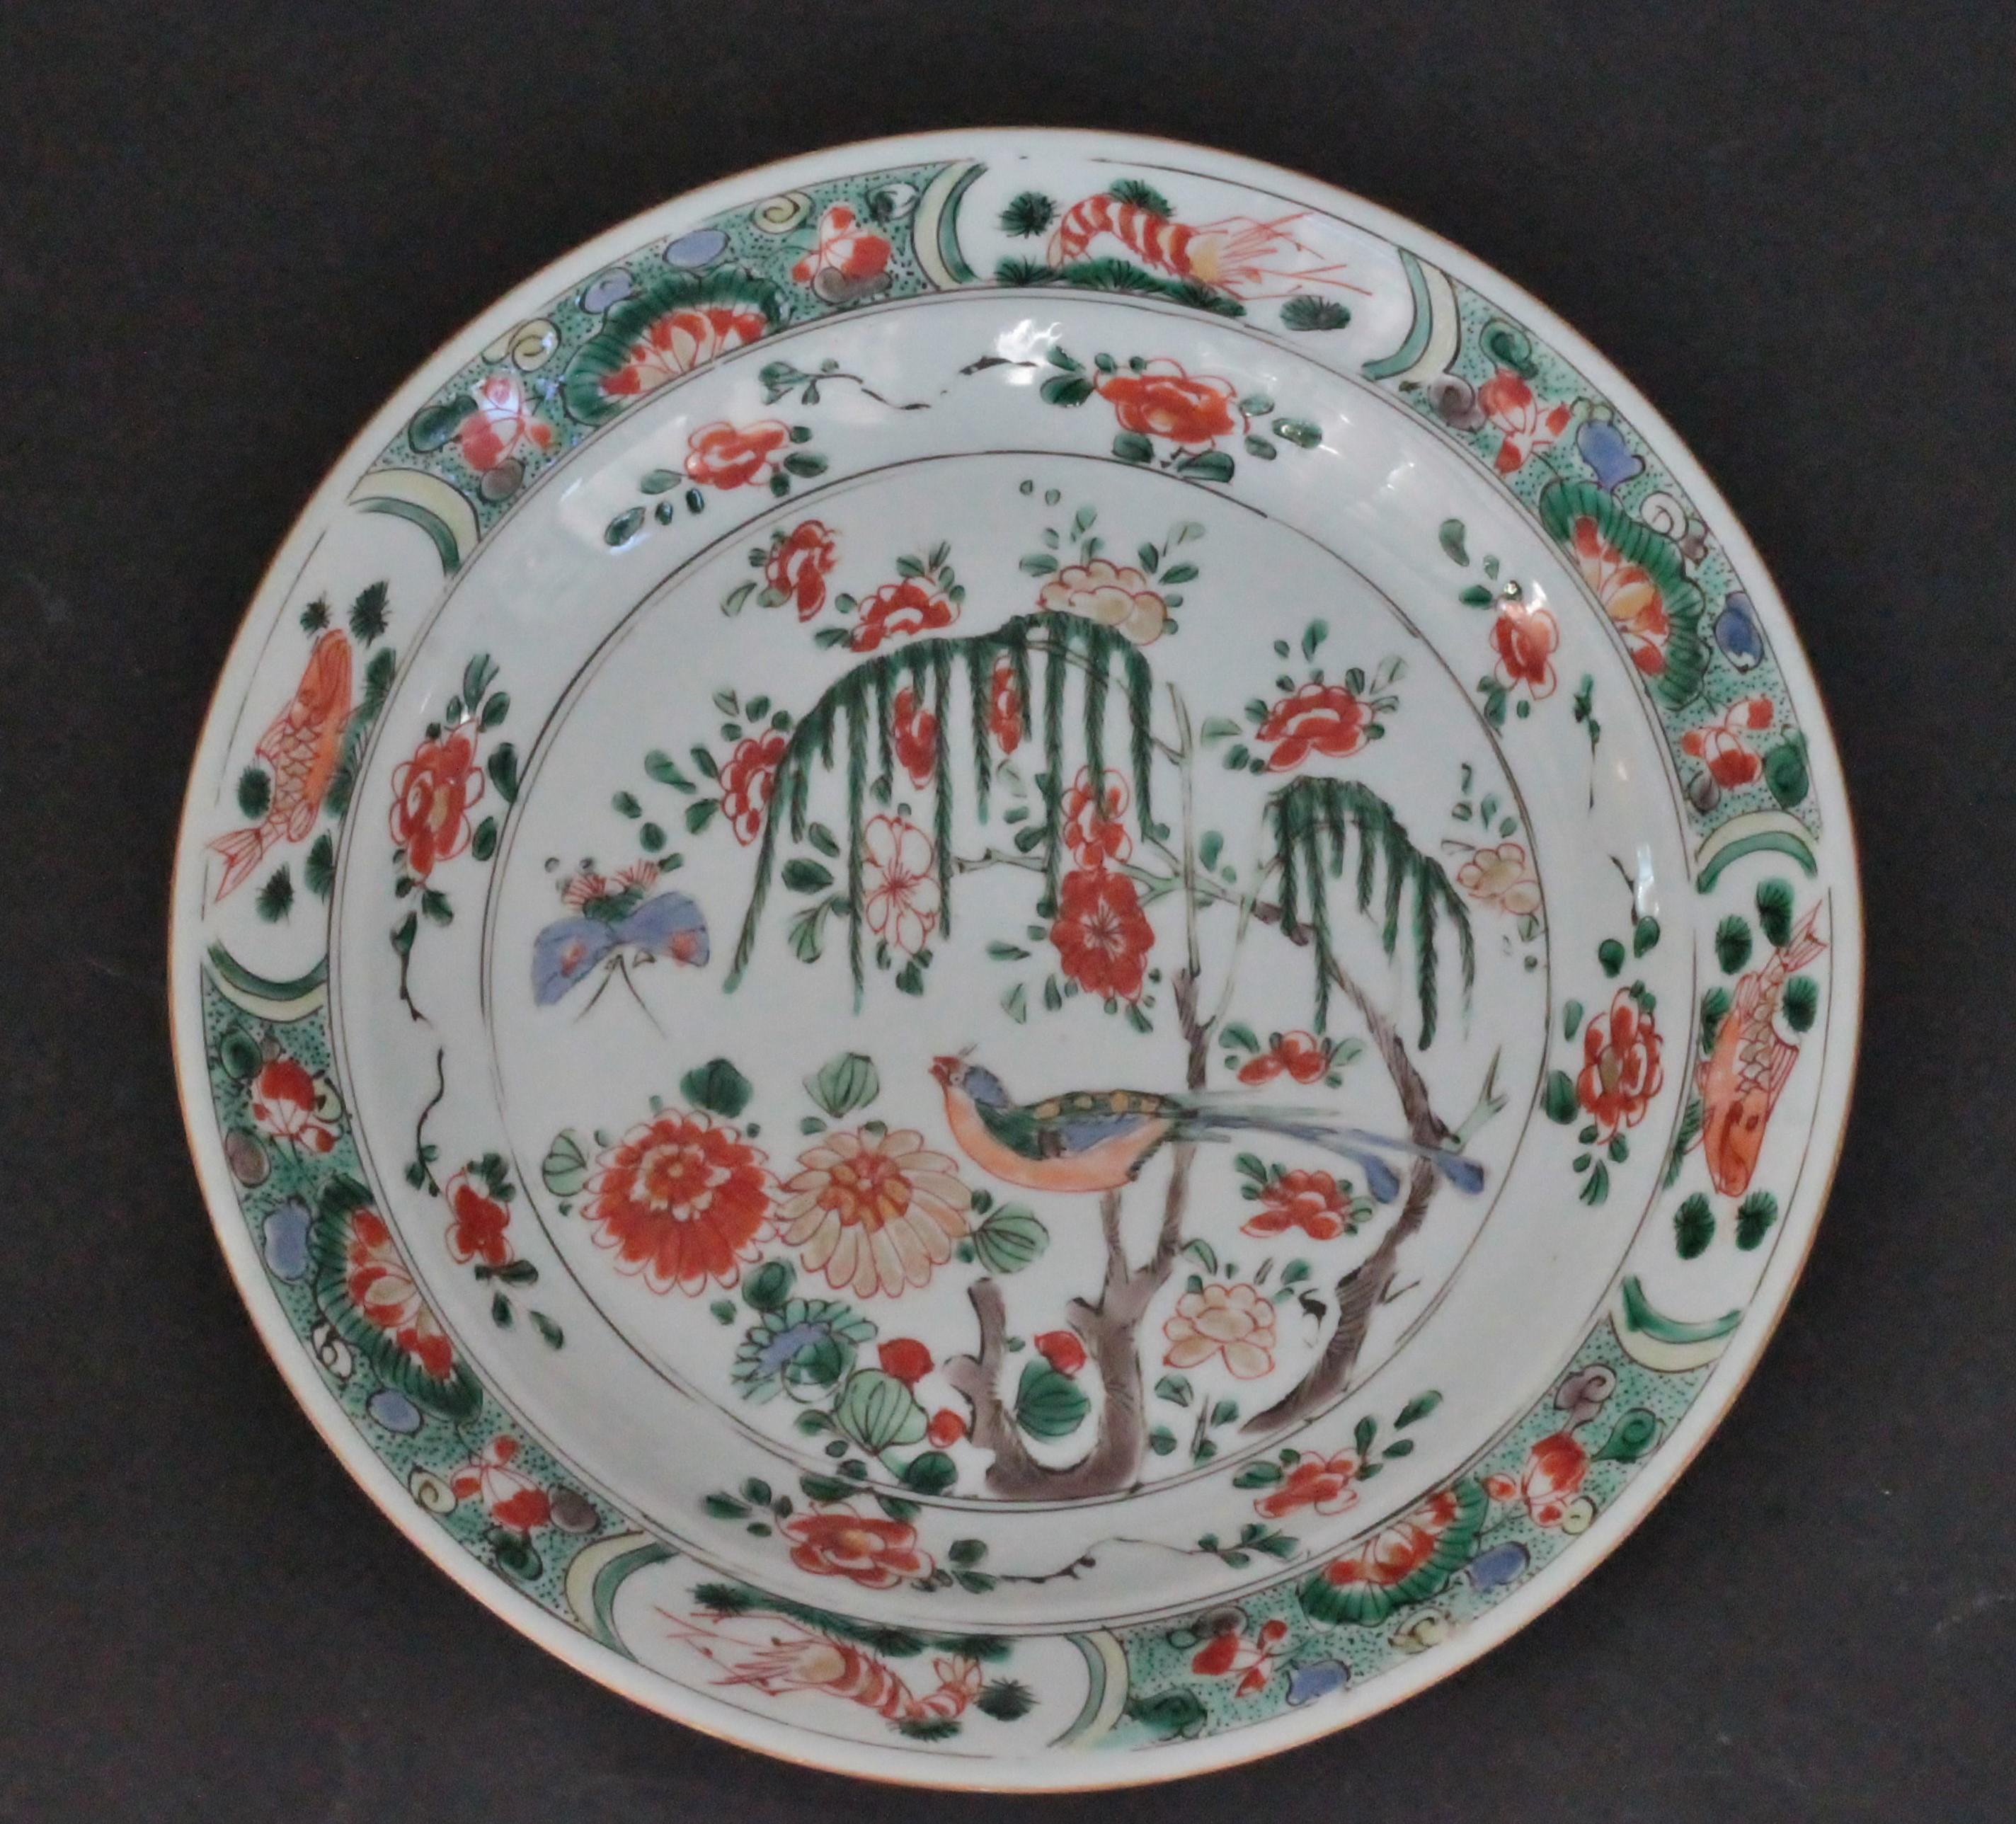 Chinese Two Famille Verte Plates in China Porcelain, Kangxi Period ‘1662-1722’